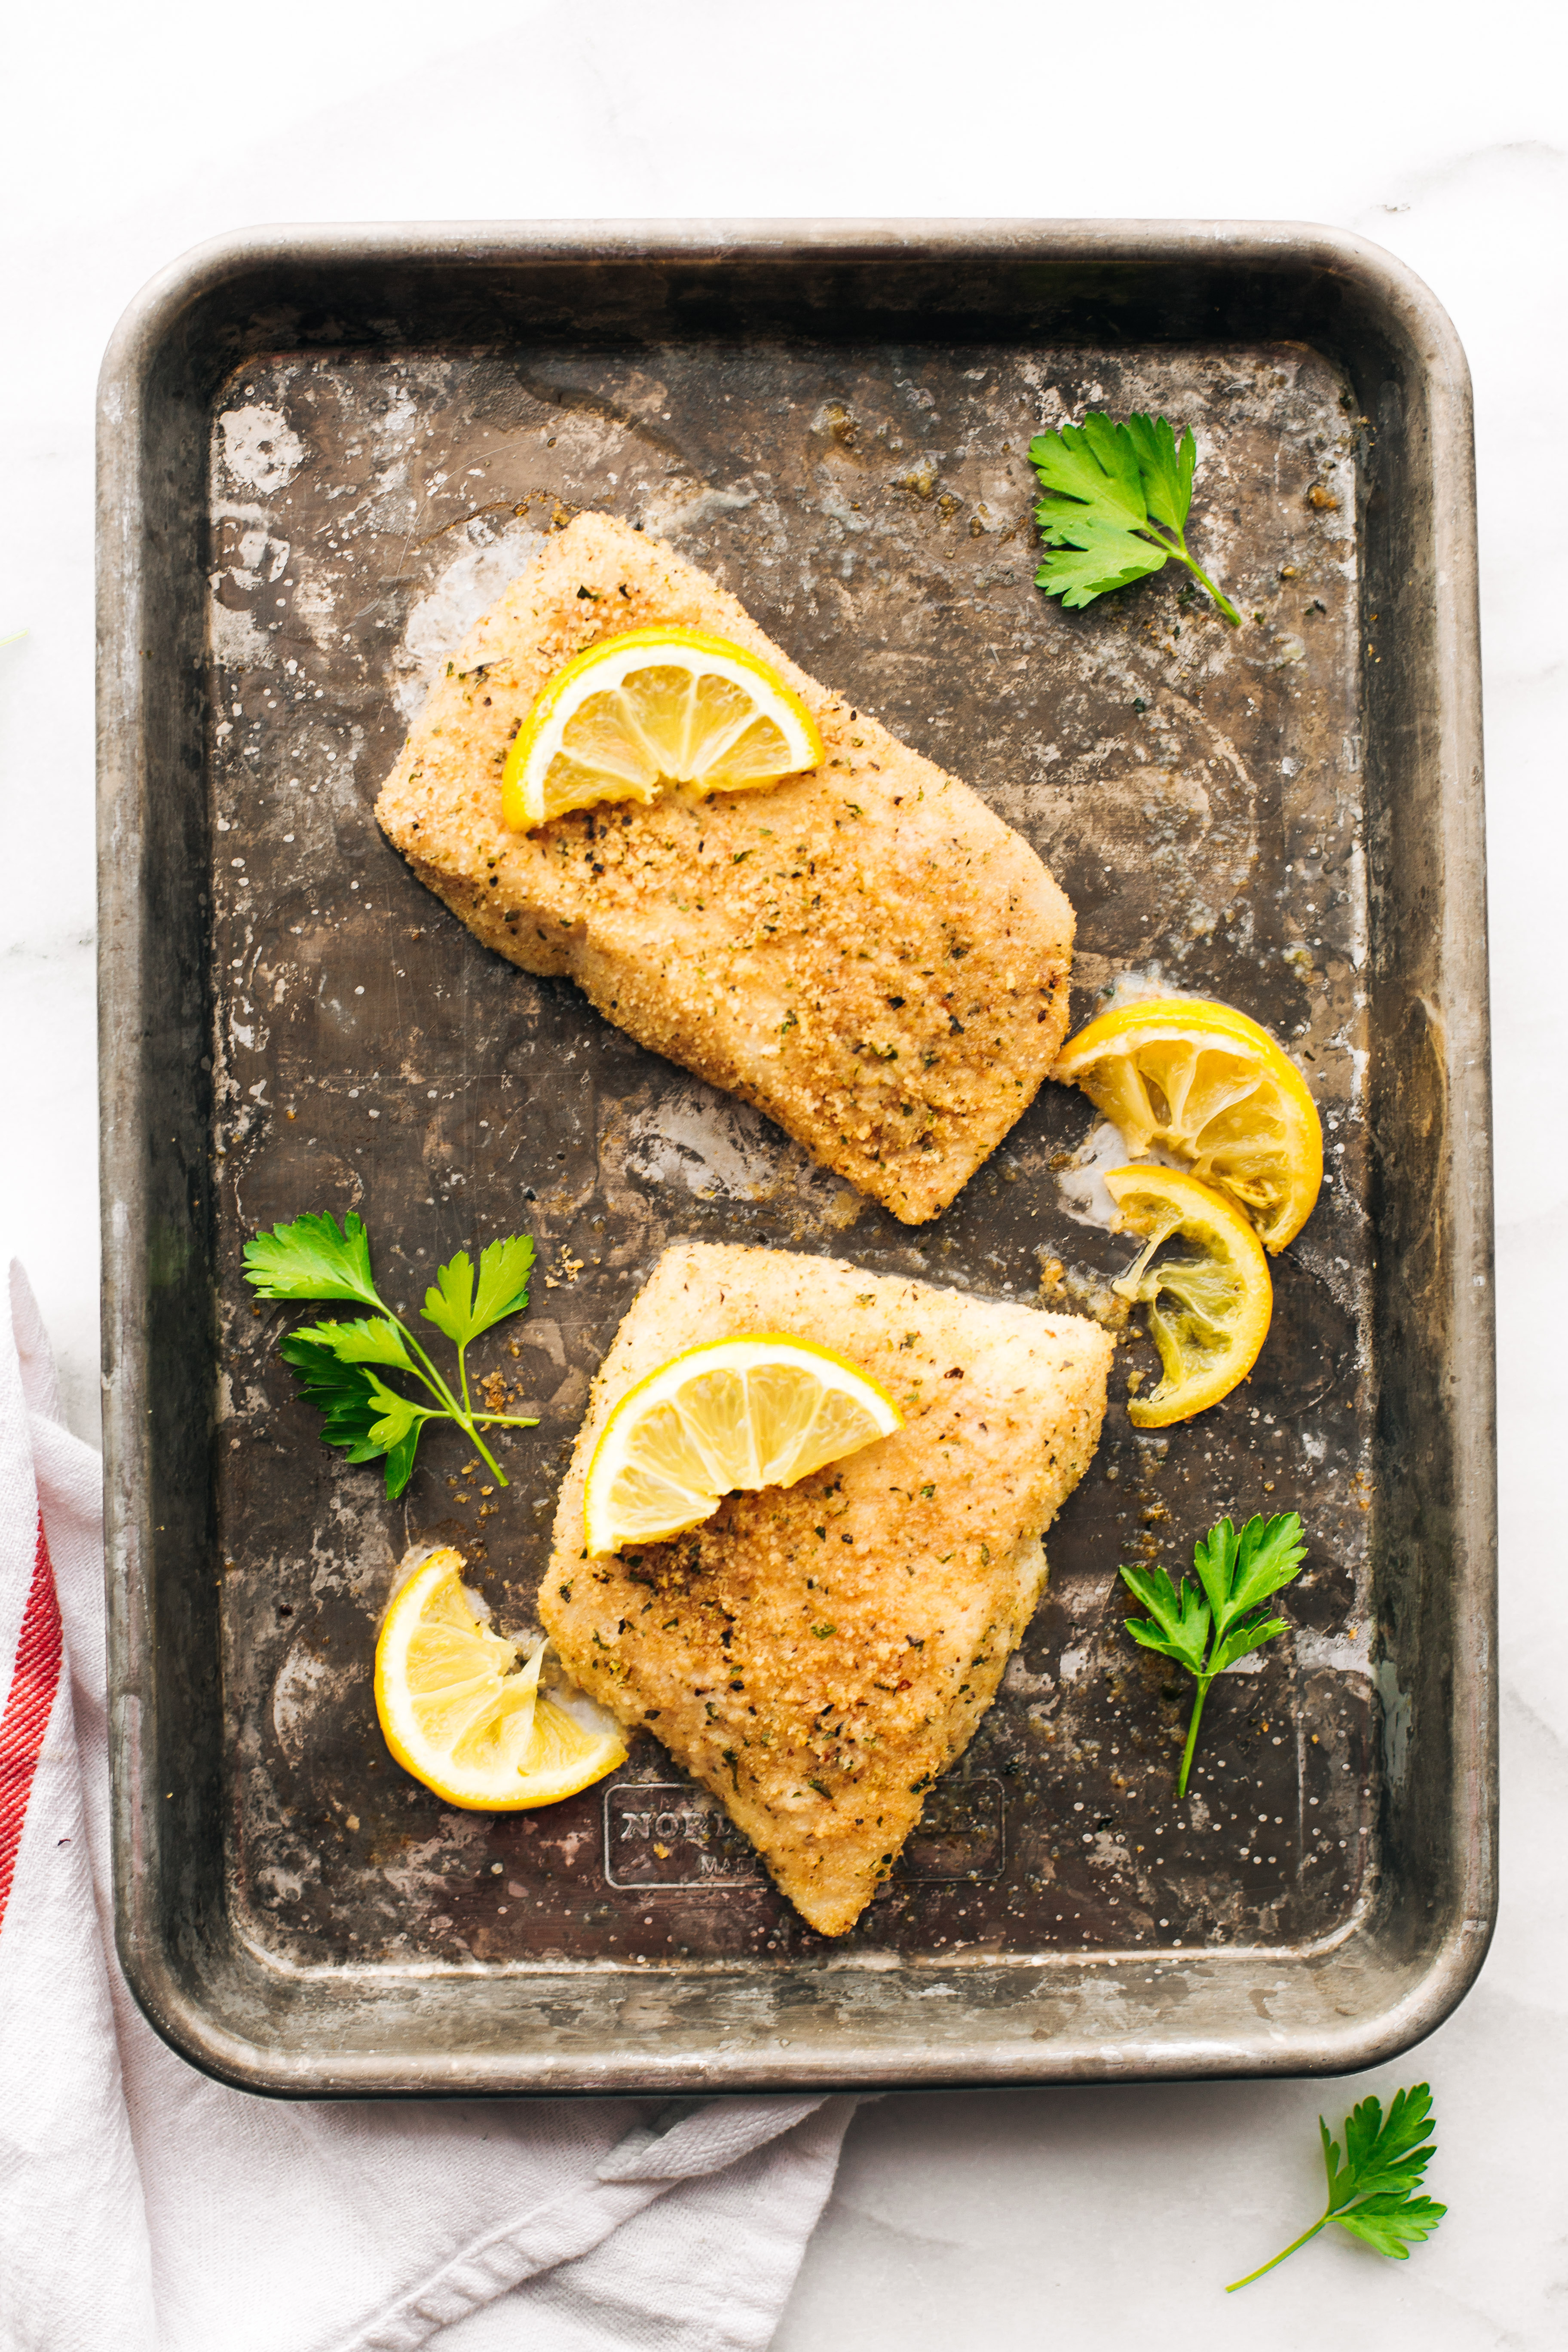 Baked Halibut with bread crumbs recipe